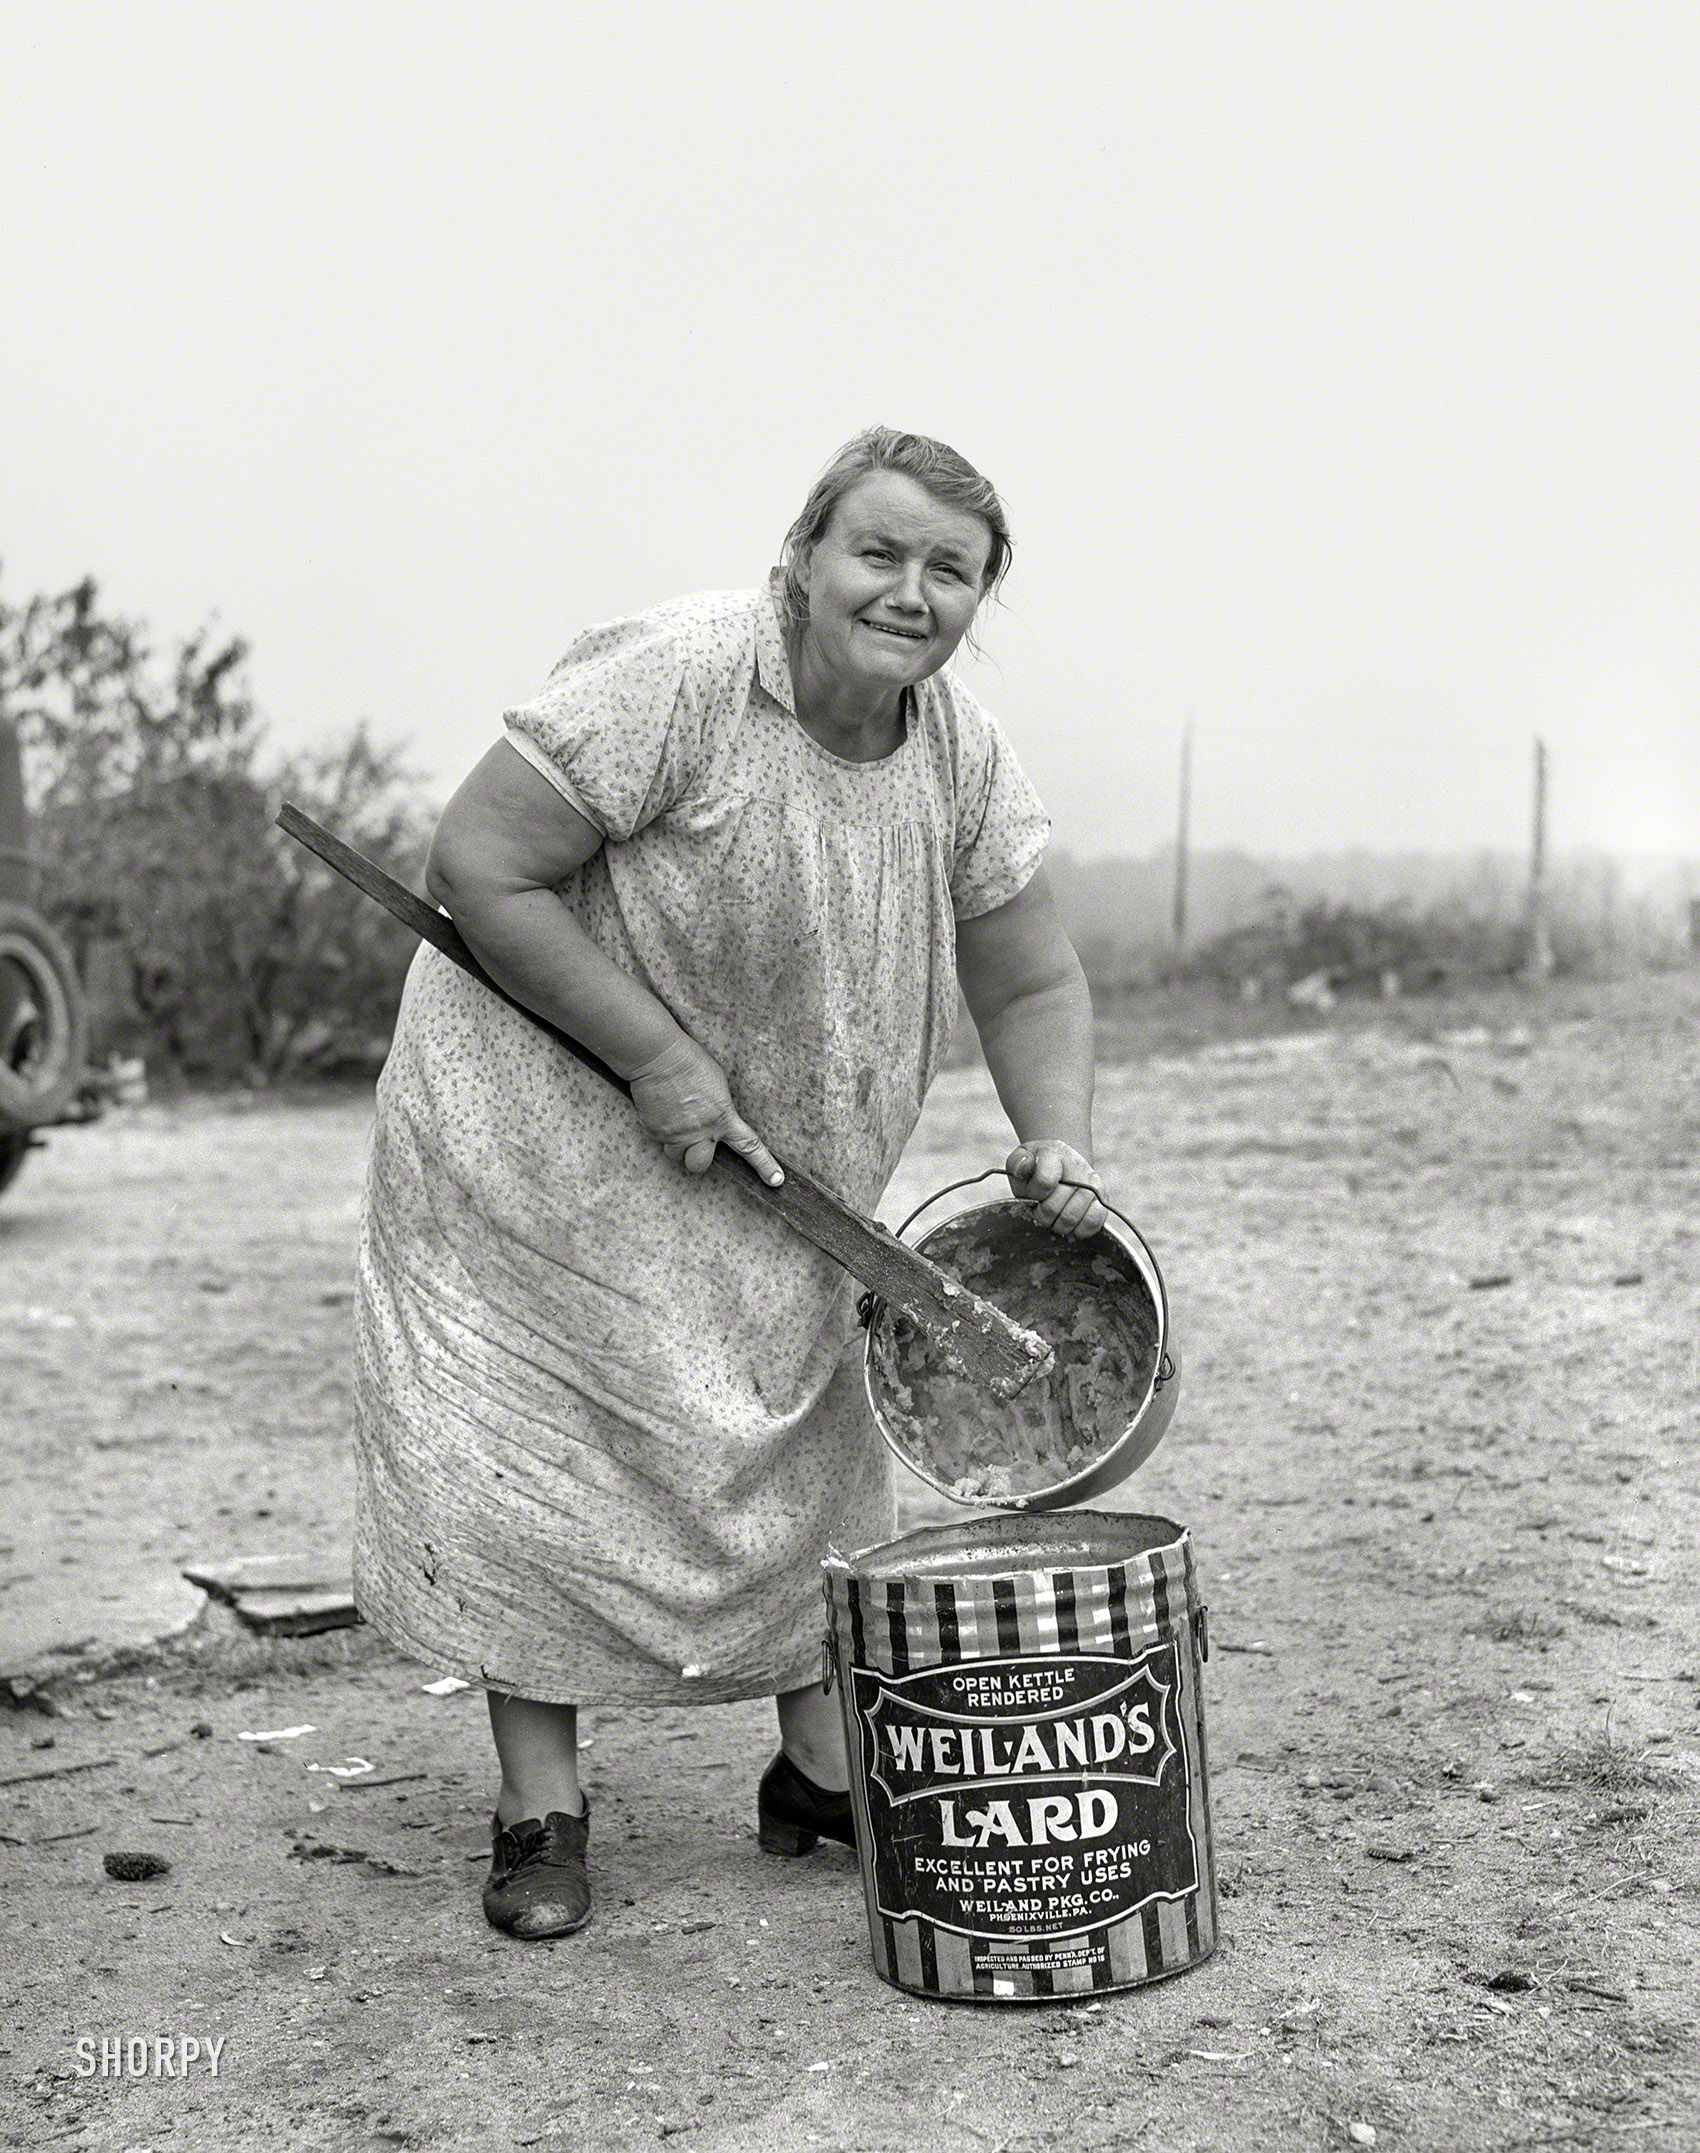 October 1938. "Farm wife. Burlington County, New Jersey." Photo by Arthur Rothstein for the Farm Security Administration. View full size.